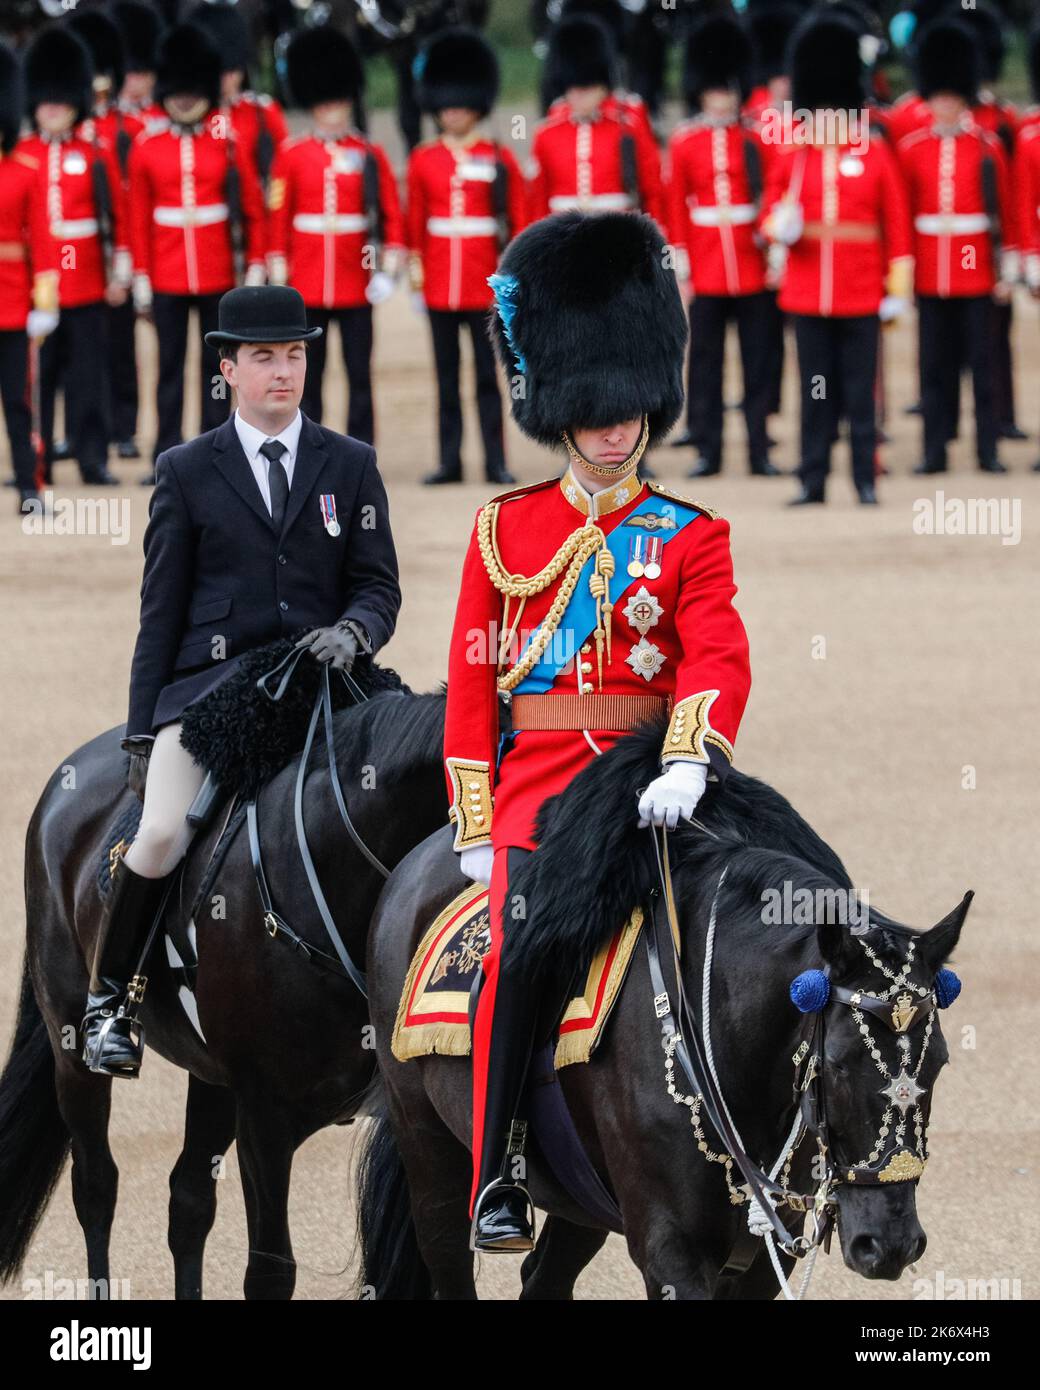 Prince William, now the Prince of Wales, inspecting the line in  ceremonial uniform on horseback, the Colonel's Review,  Trooping the Colour, London Stock Photo